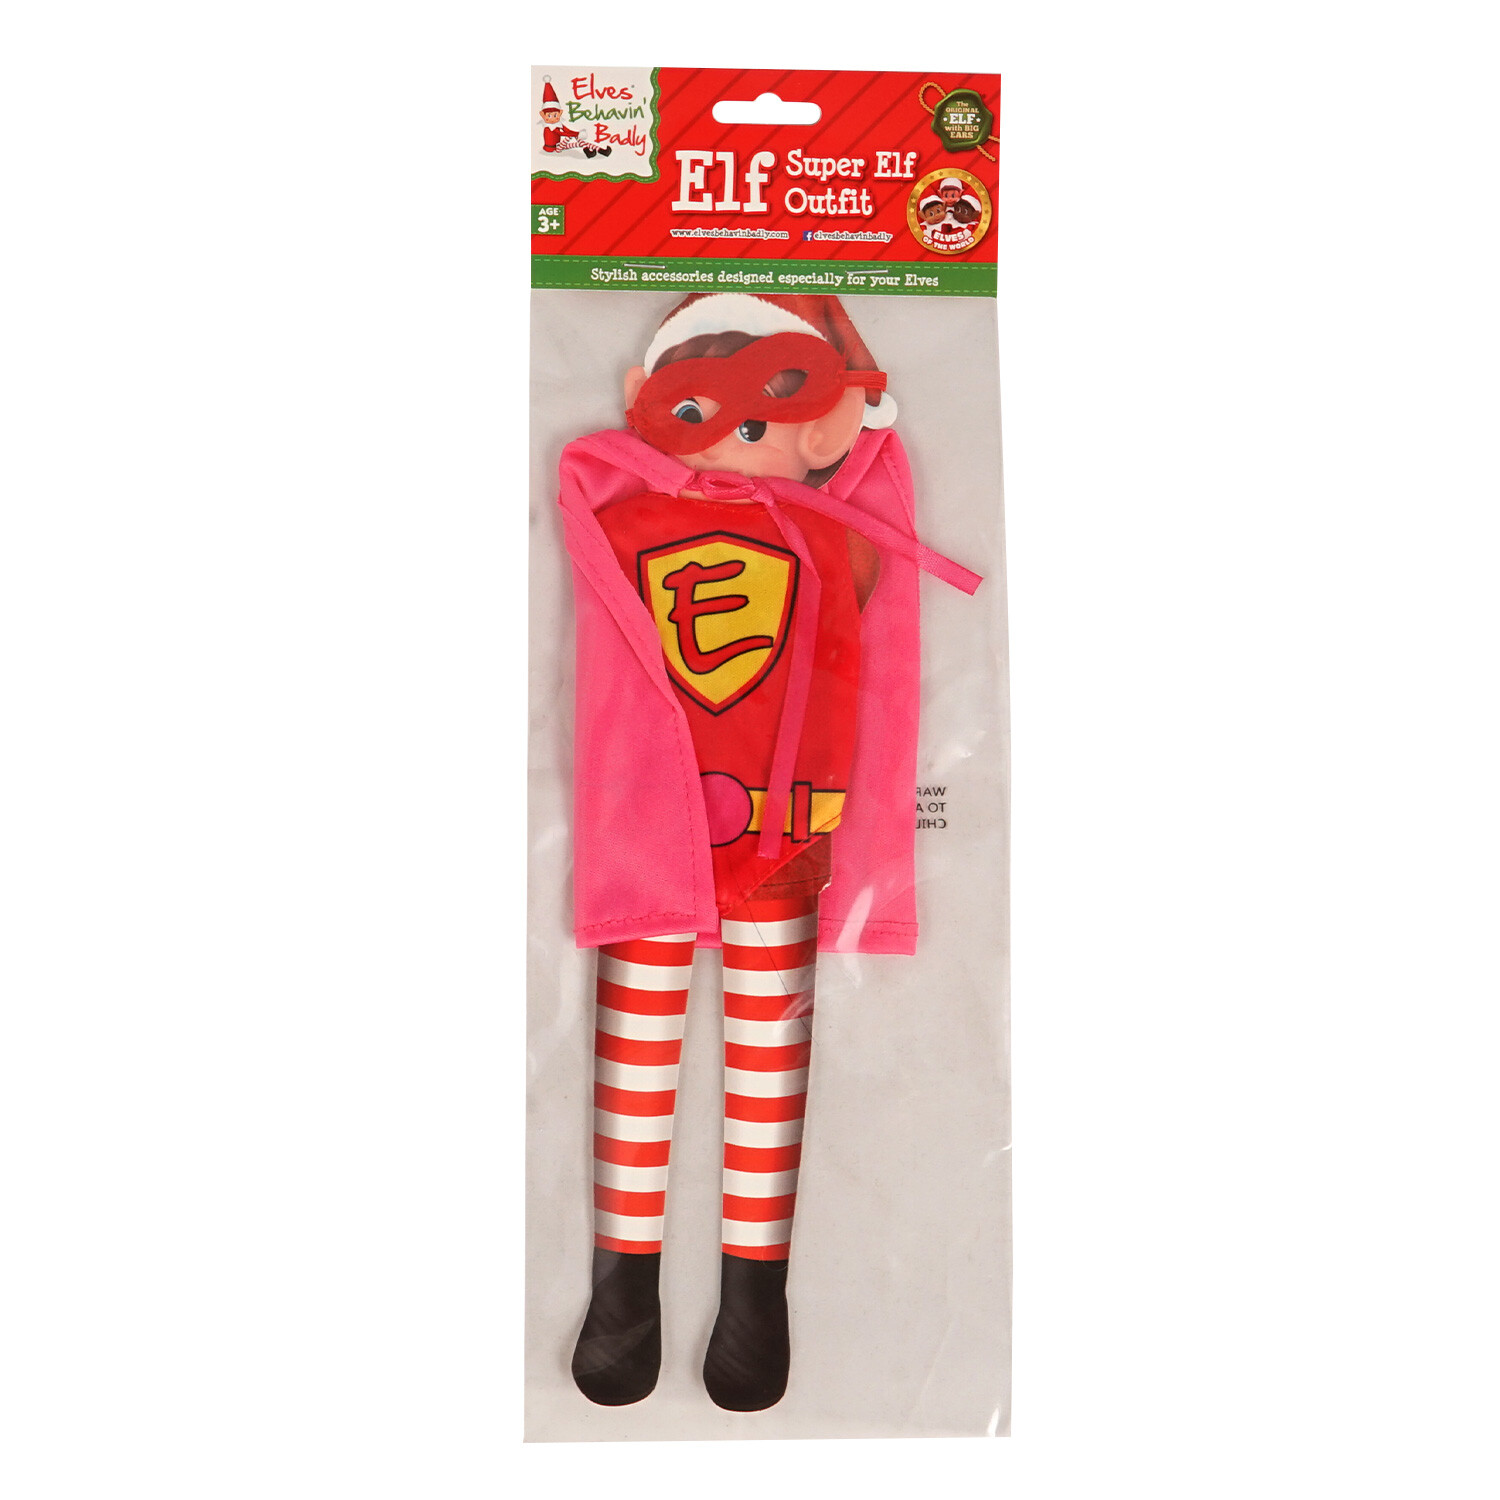 Single Elves Behavin' Badly Super Elf Outfit in Assorted styles Image 1